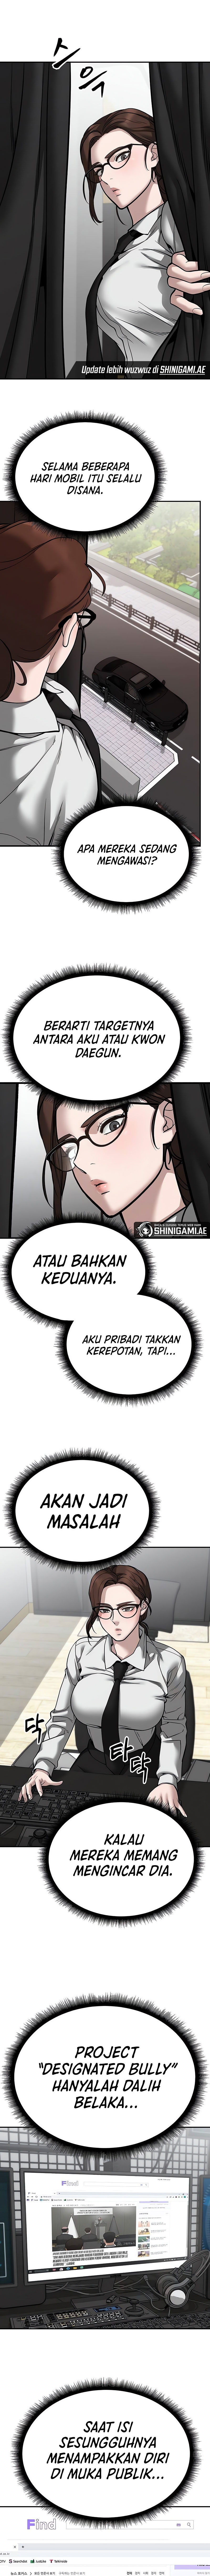 the-bully-in-charge Chapter 96